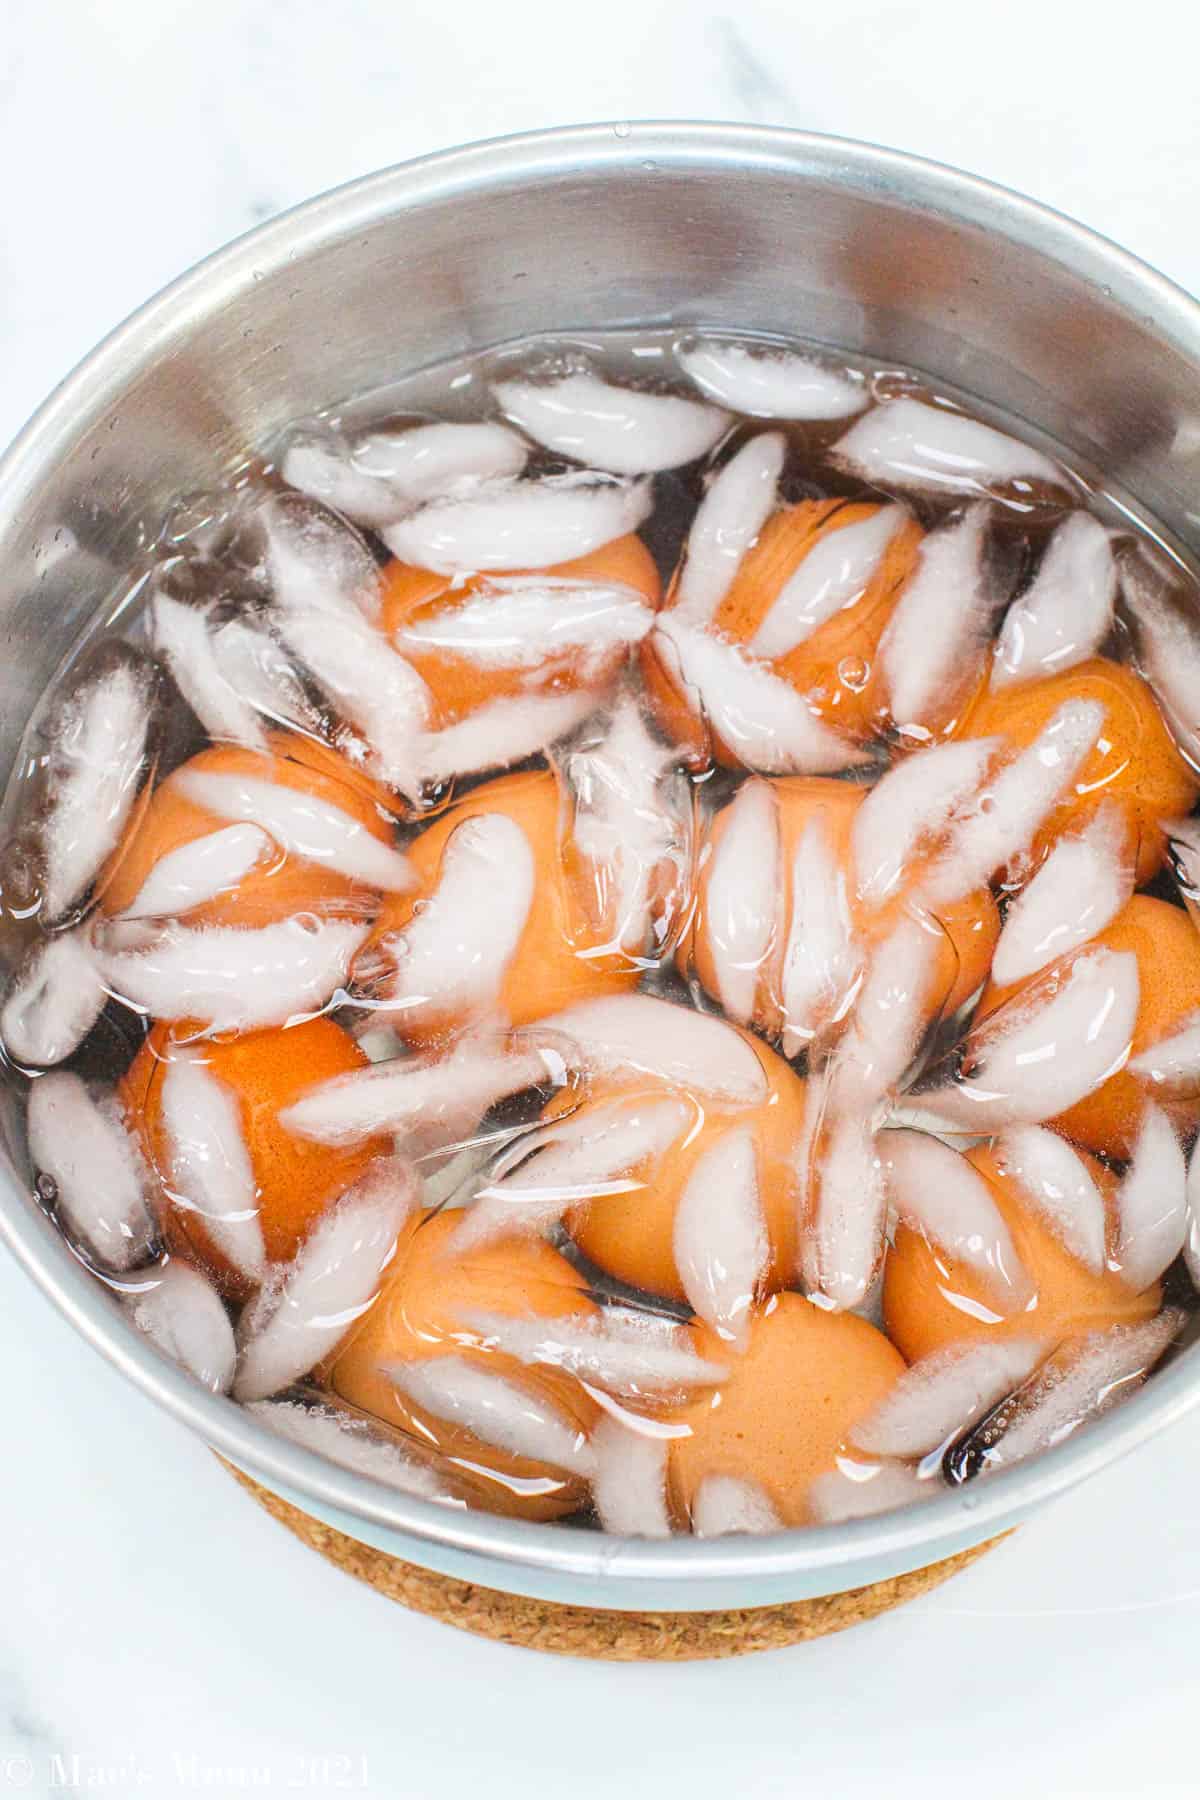 Hard-boiled eggs in a metal bowl of an ice bath